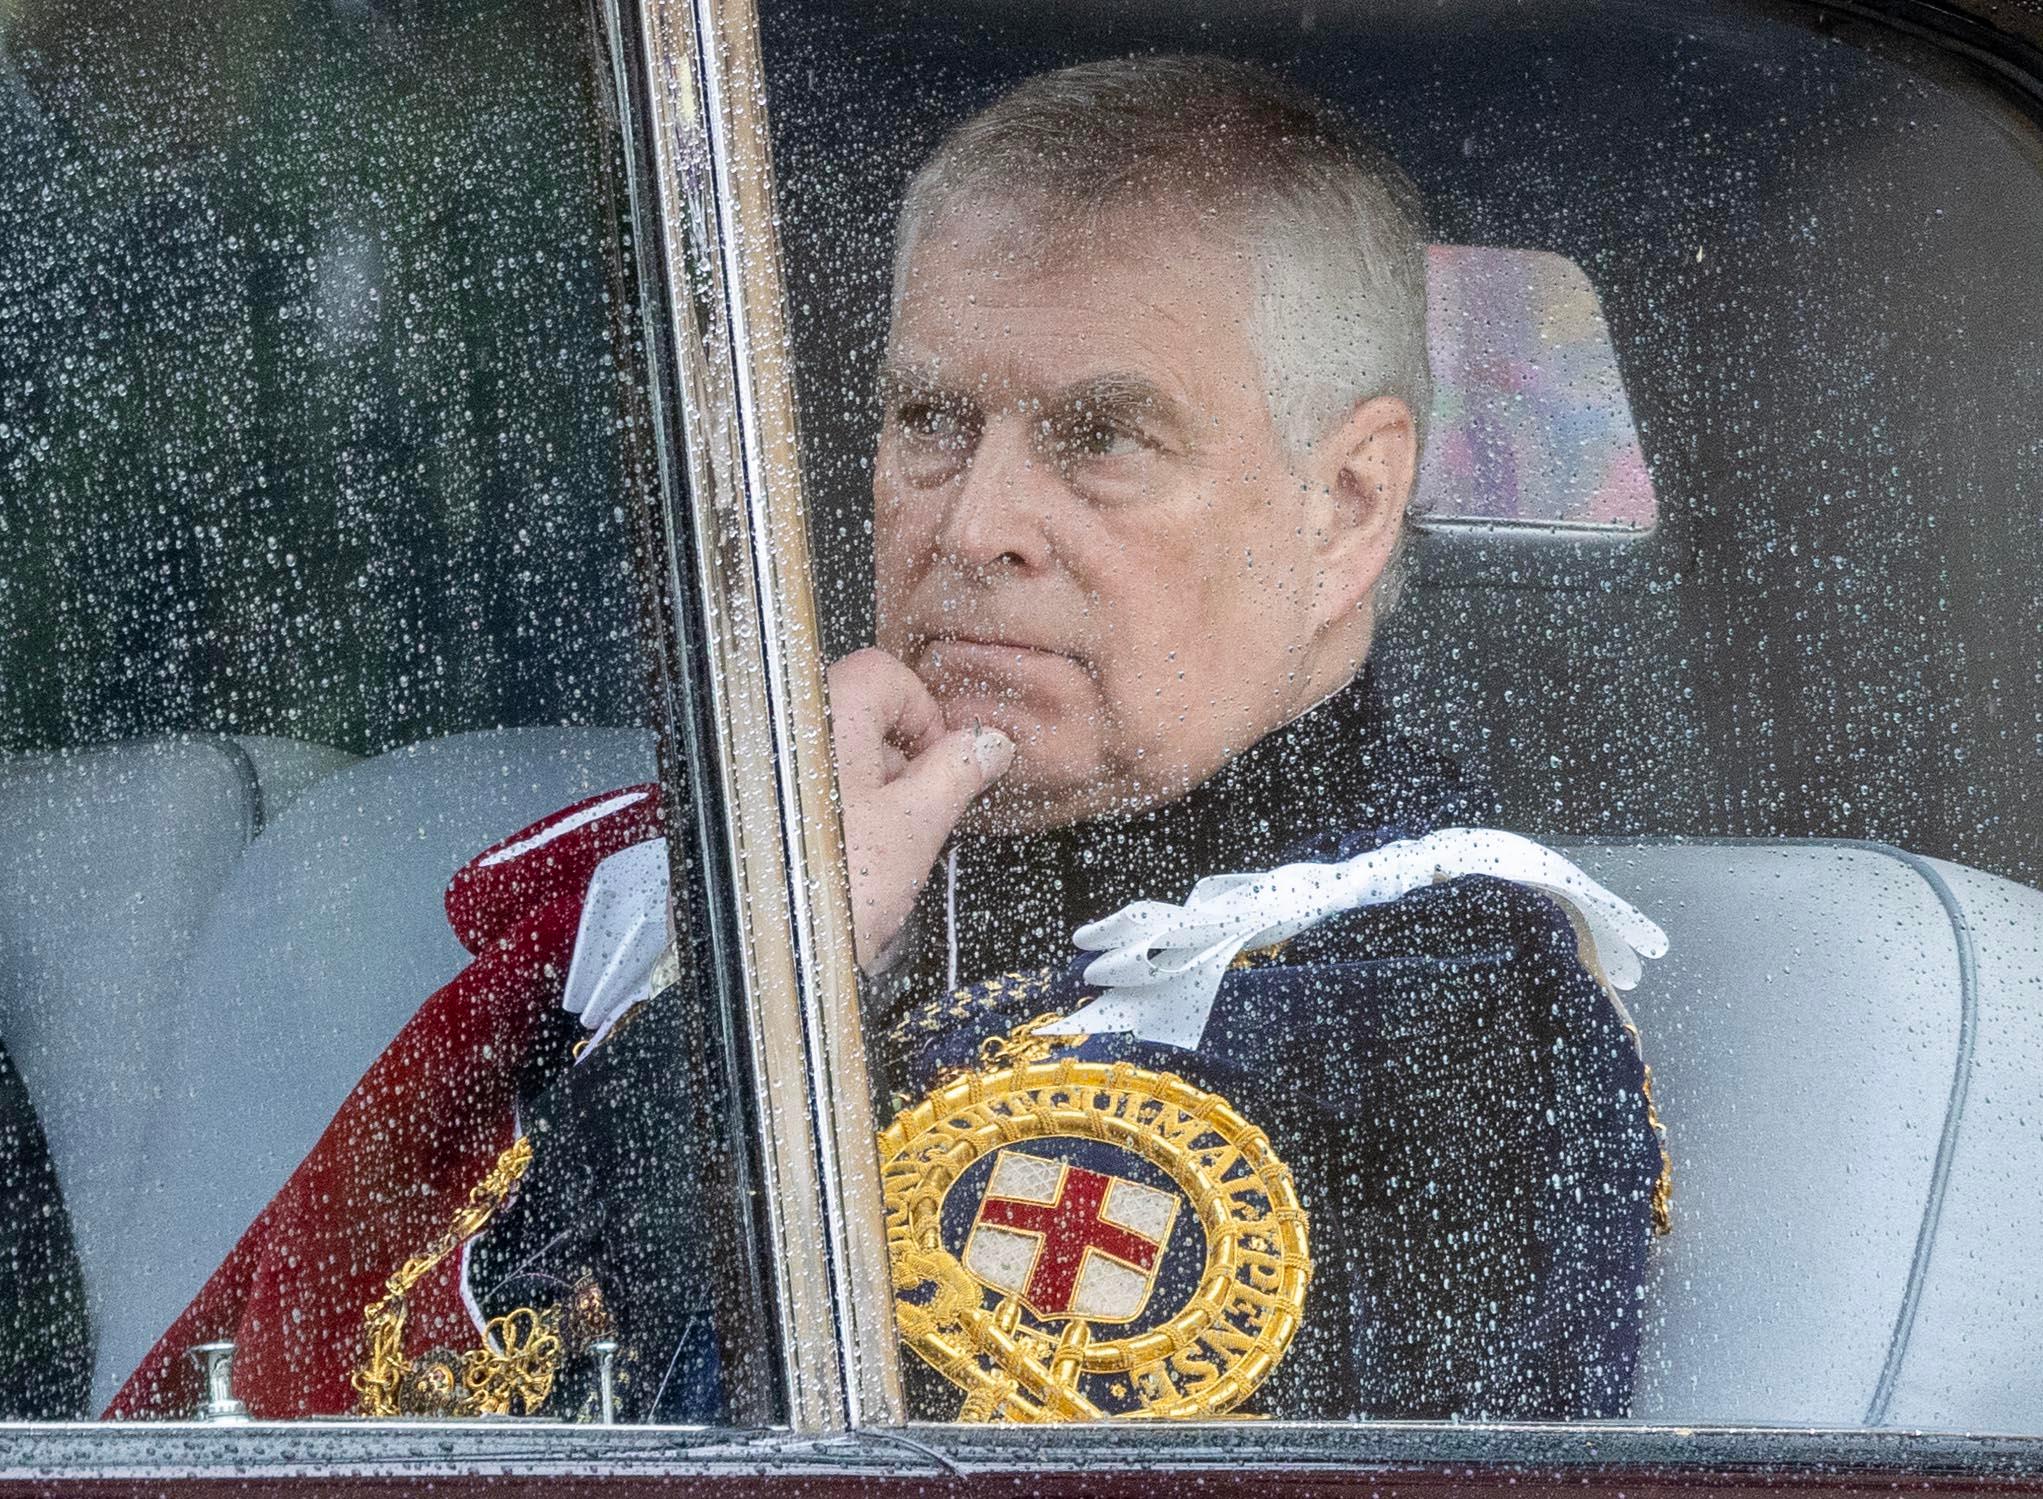 Prince Andrew at The Coronation of King Charles III and Queen Consort Camilla